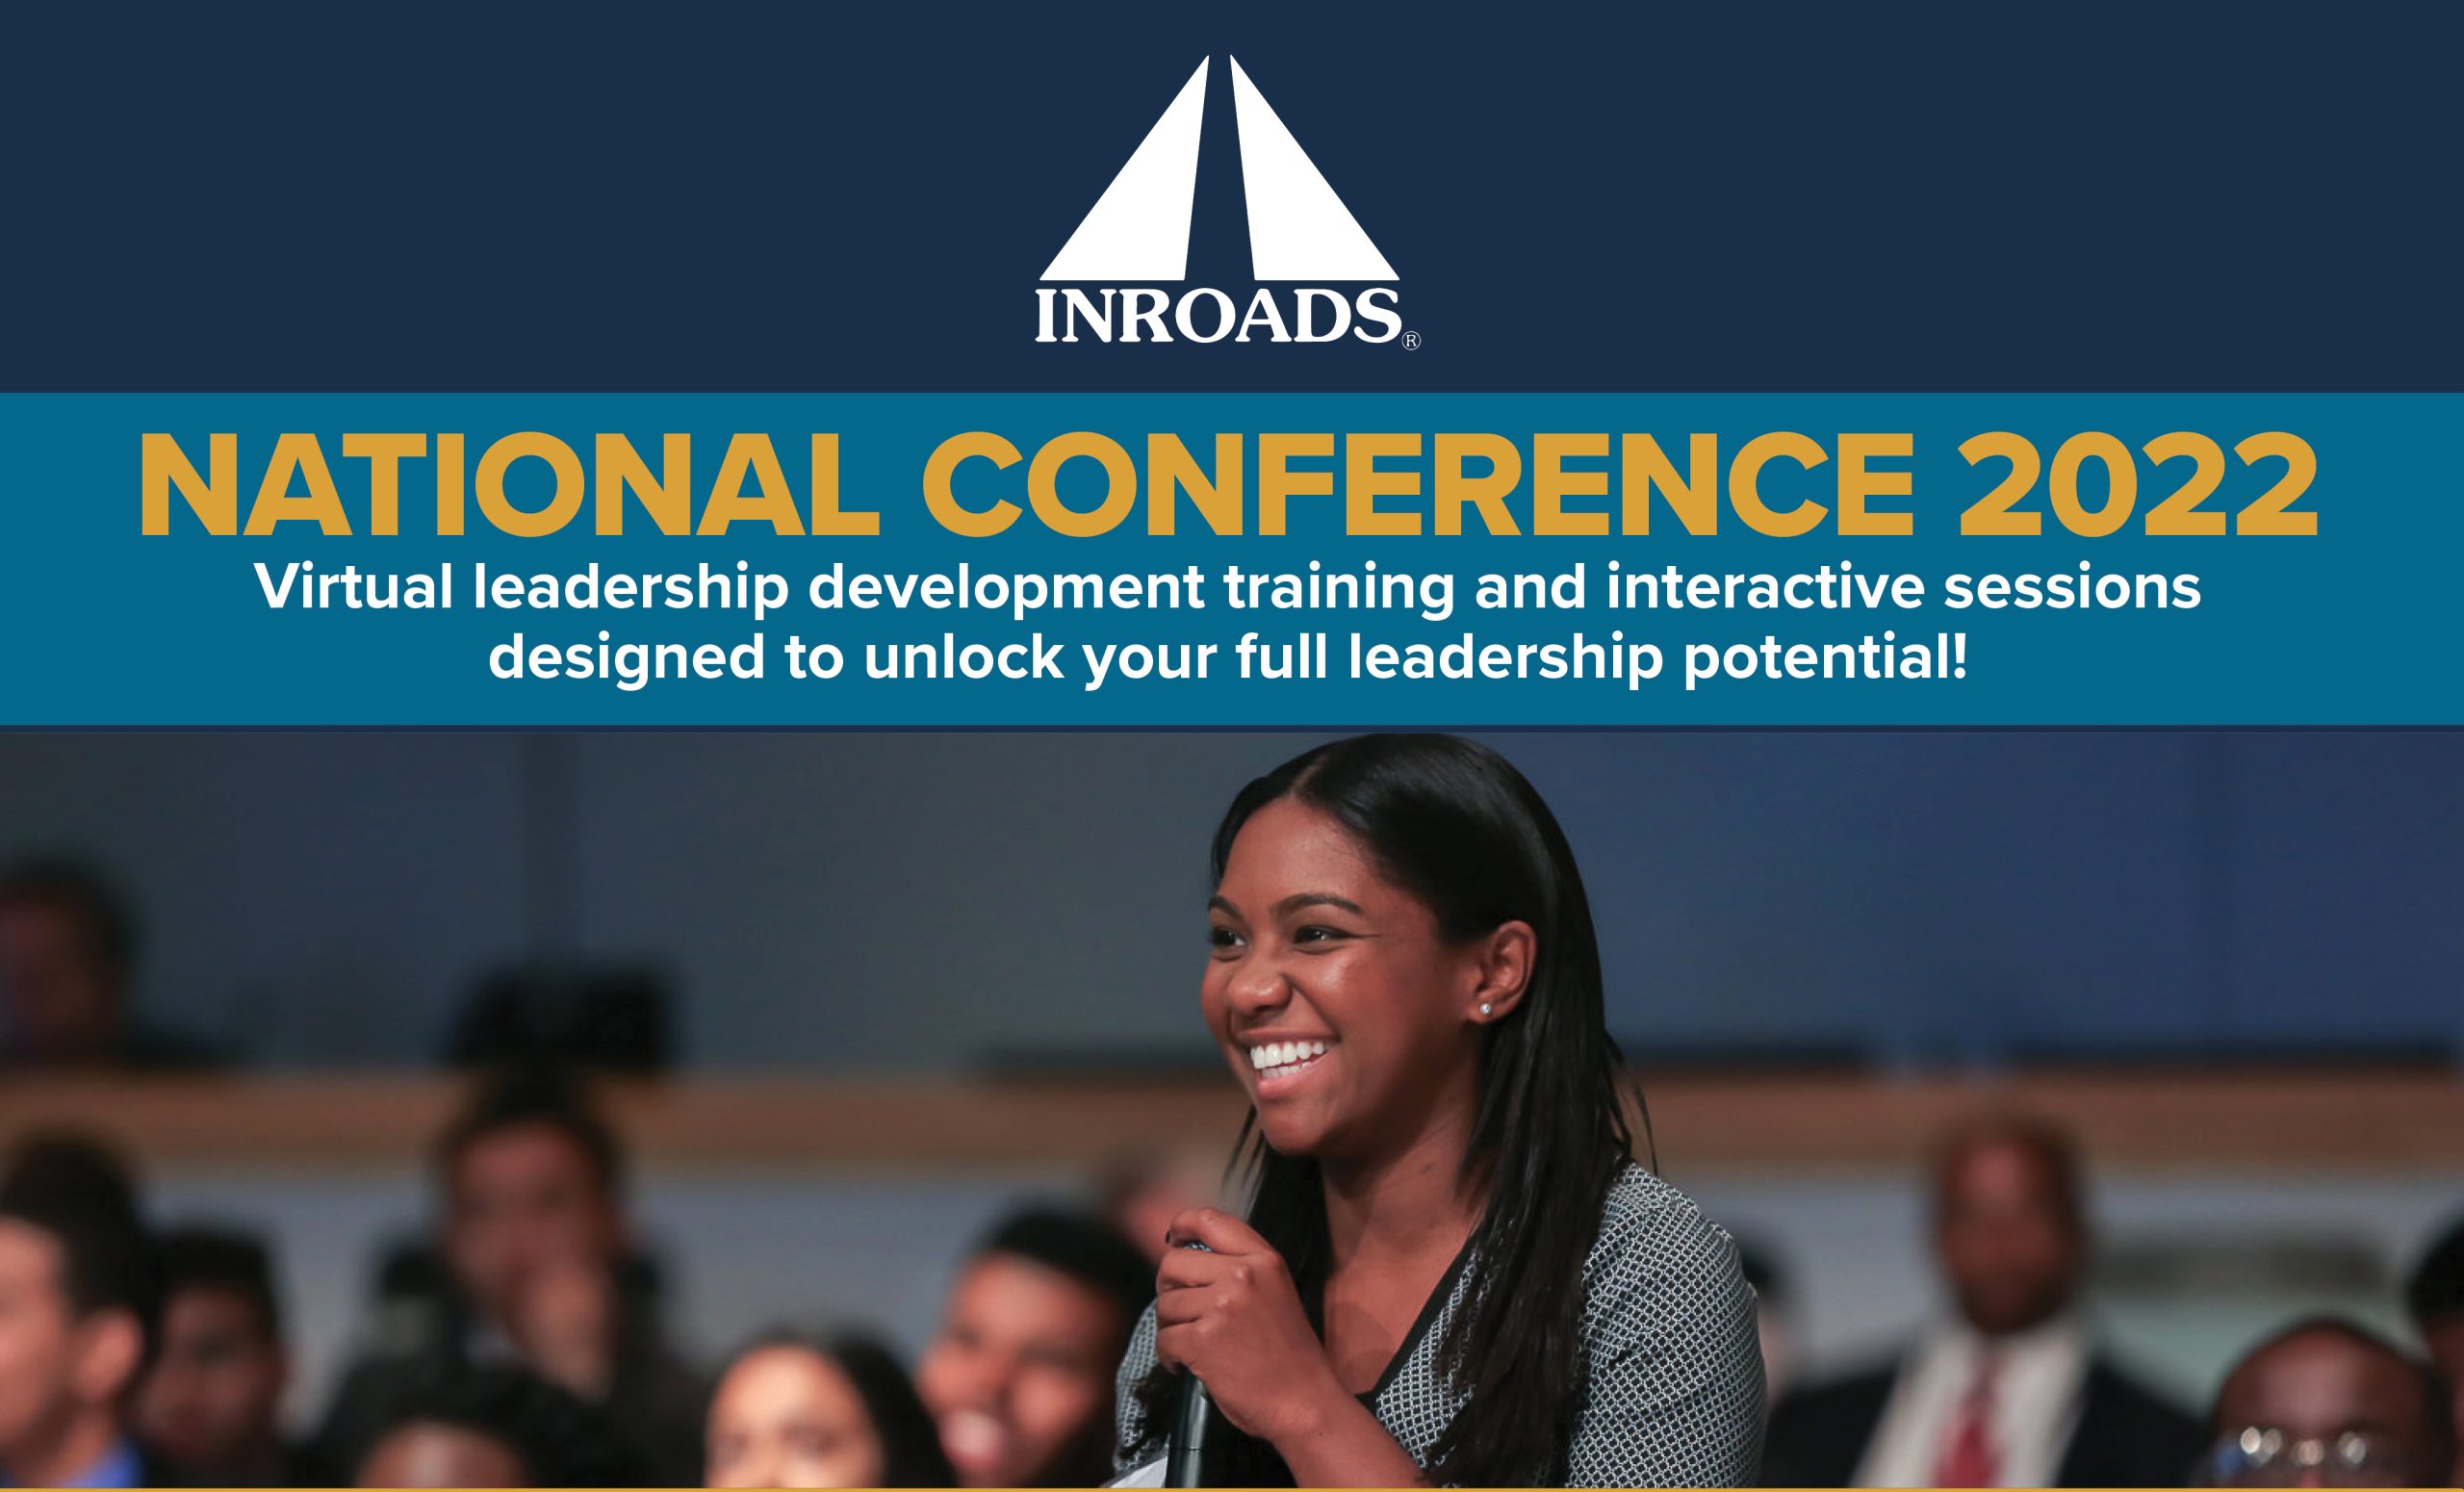 Featured image for “INROADS EMPOWERS FUTURE LEADERS OF TOMORROW THROUGH AN IMMERSIVE, 3D VIRTUAL LEADERSHIP DEVELOPMENT EXPERIENCE”